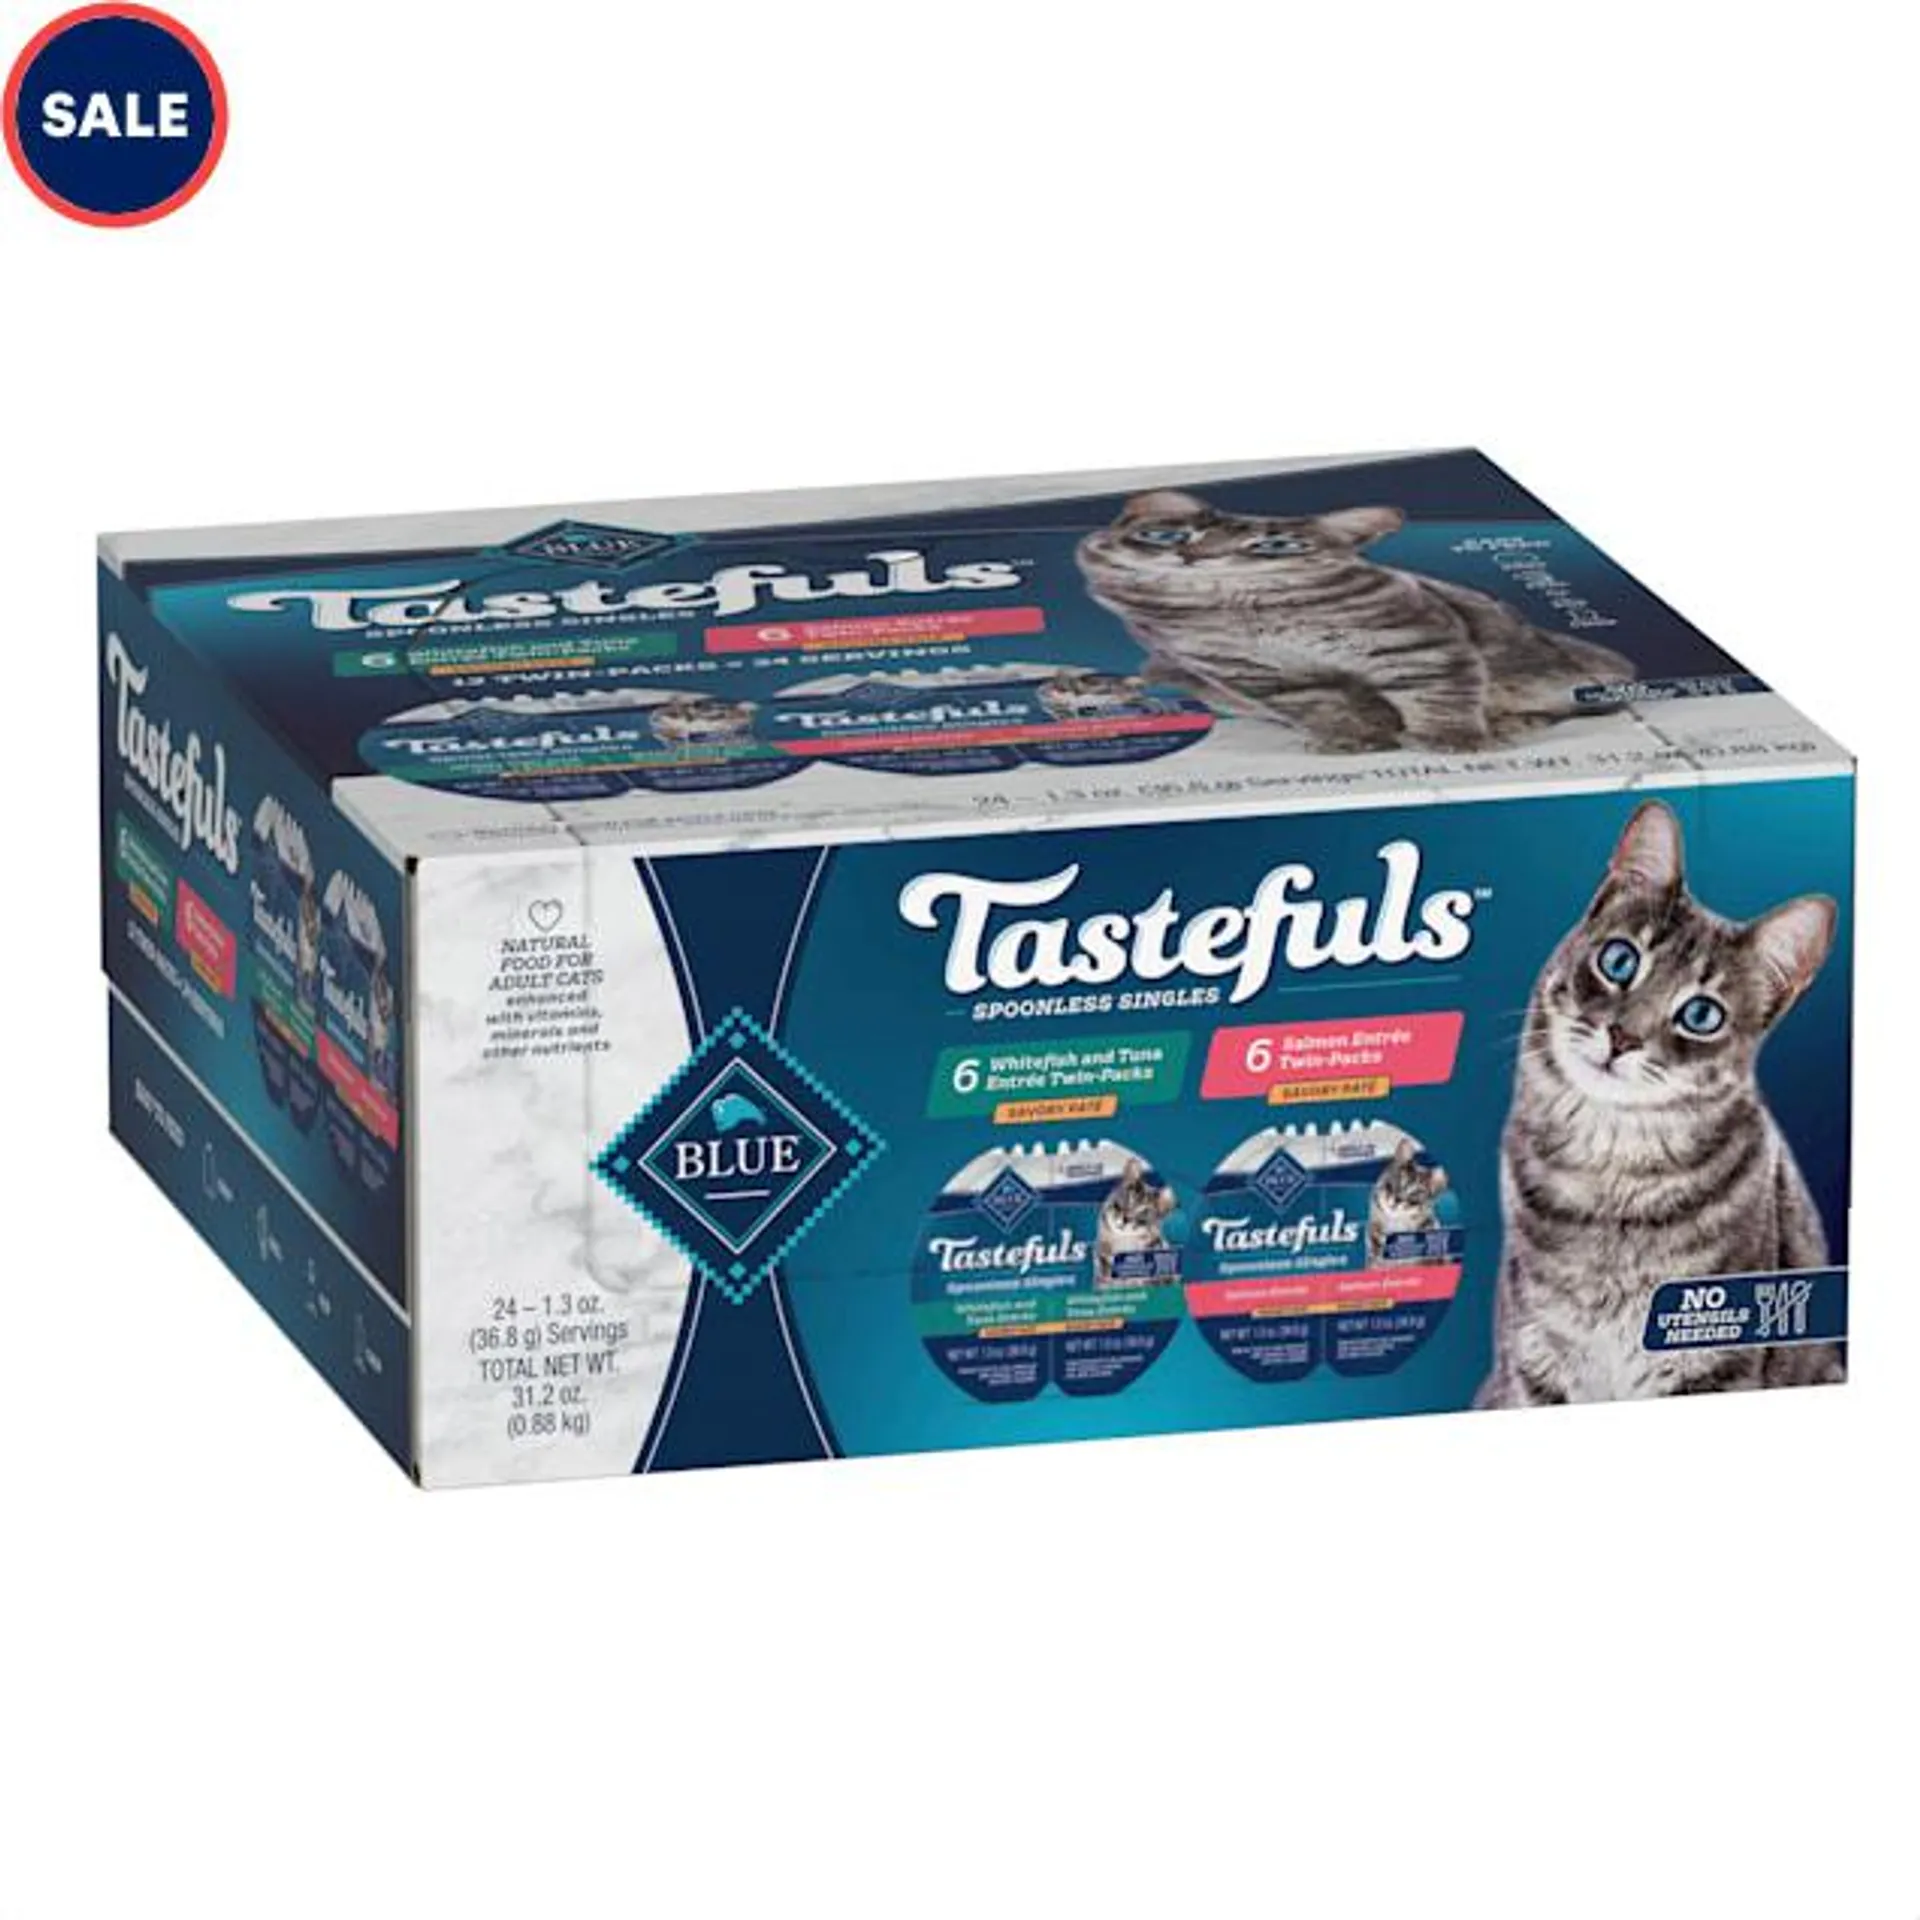 Blue Buffalo Blue Tastefuls Spoonless Singles Whitefish/Tuna/Salmon Adult Pate Wet Cat Food Variety Pack, 2.6 oz., Count of 12